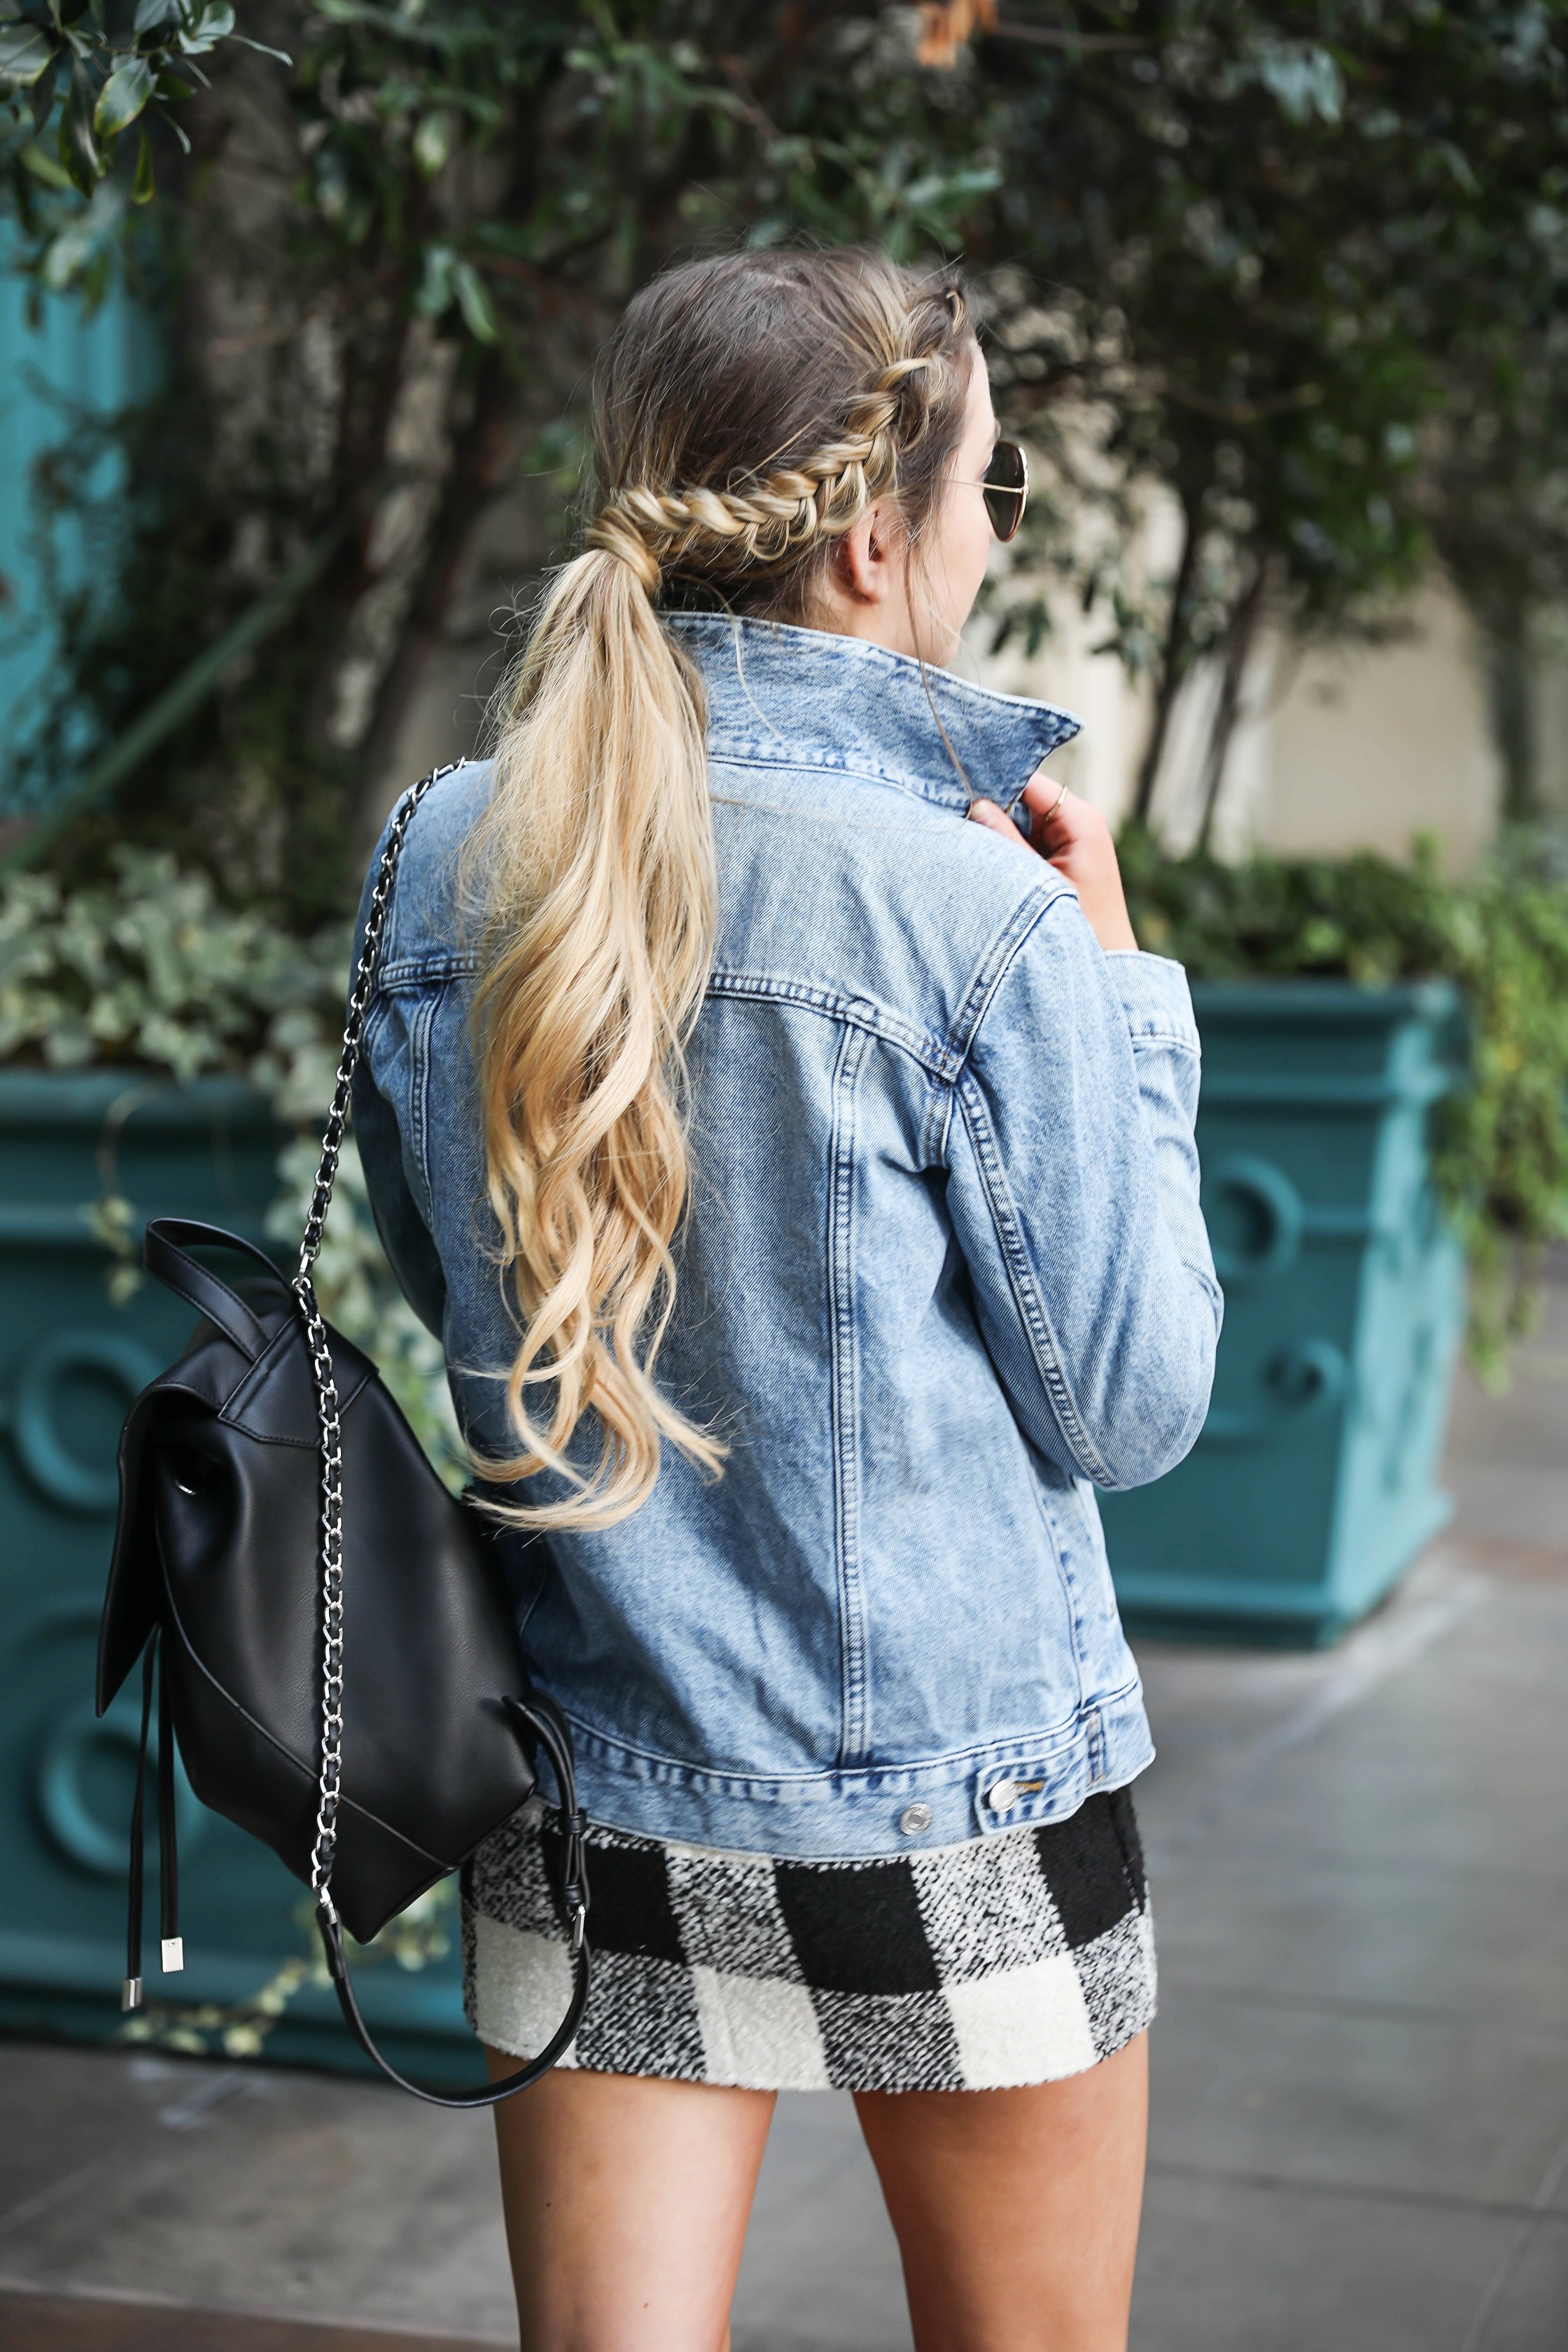 Jean jacket and plaid skirt at the Venetian Hotel & Casino in Las Vegas! Details on fashion blog daily dose of charm by lauren lindmark